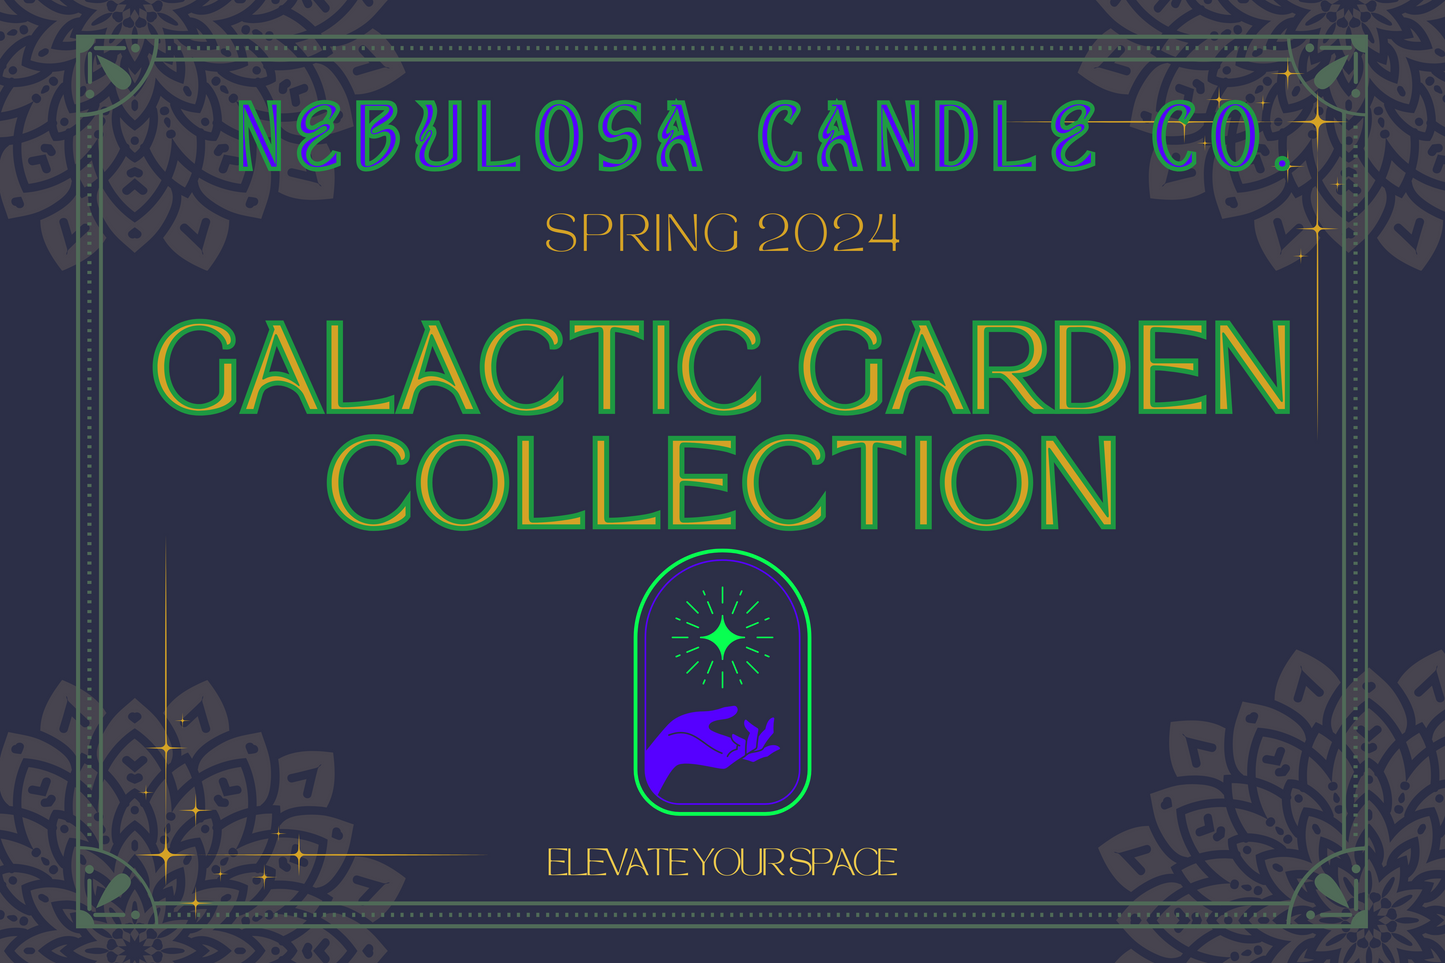 The Galactic Garden Collection Sample Packs